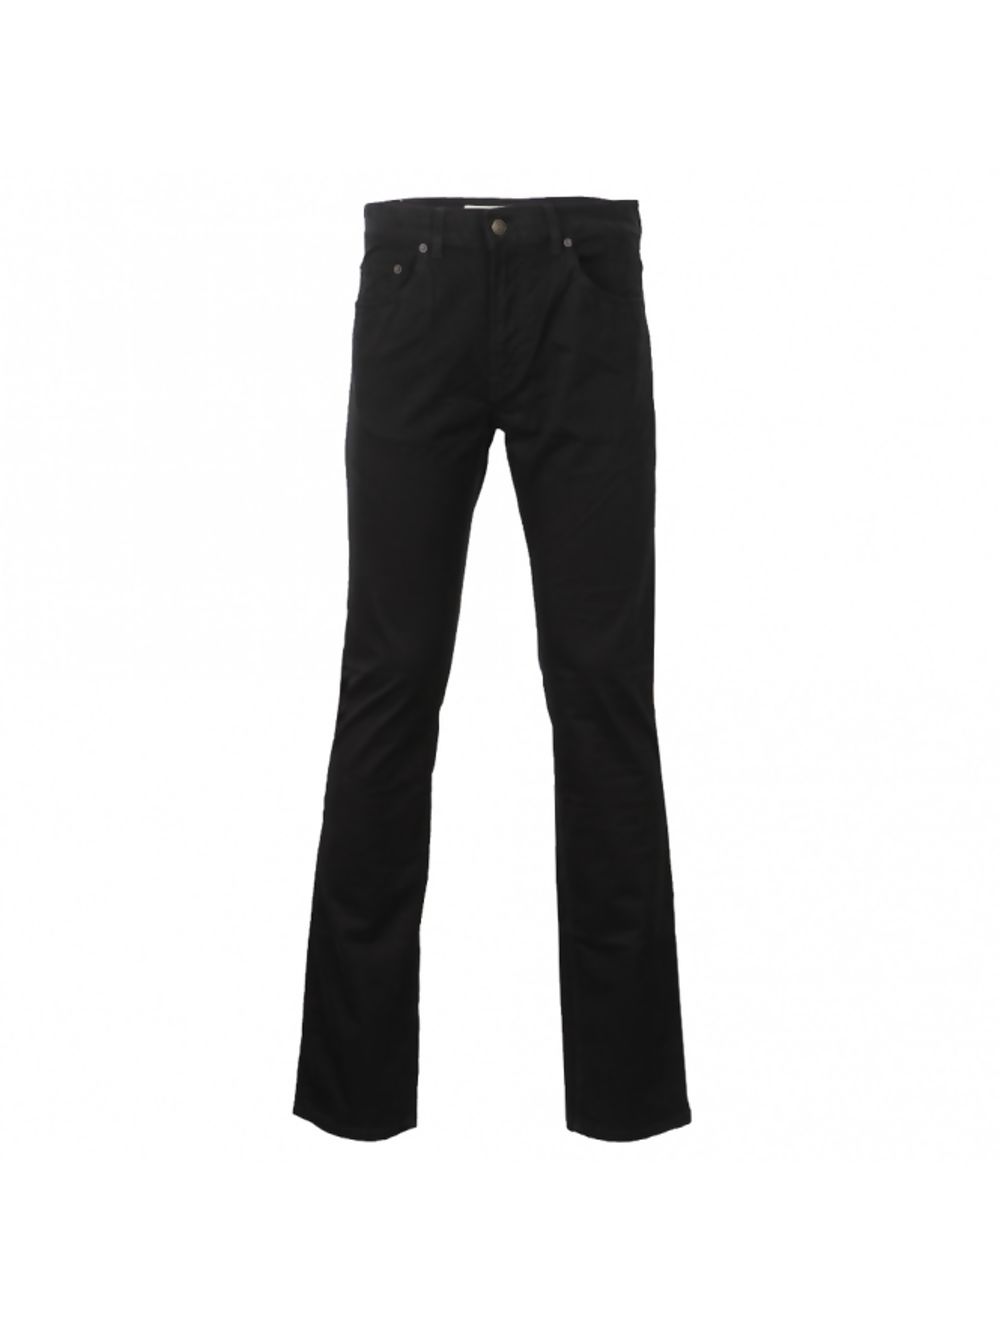 Shop The Latest Collection Of Lacoste 5 Pockets Trousers - Hh3300 In Lebanon